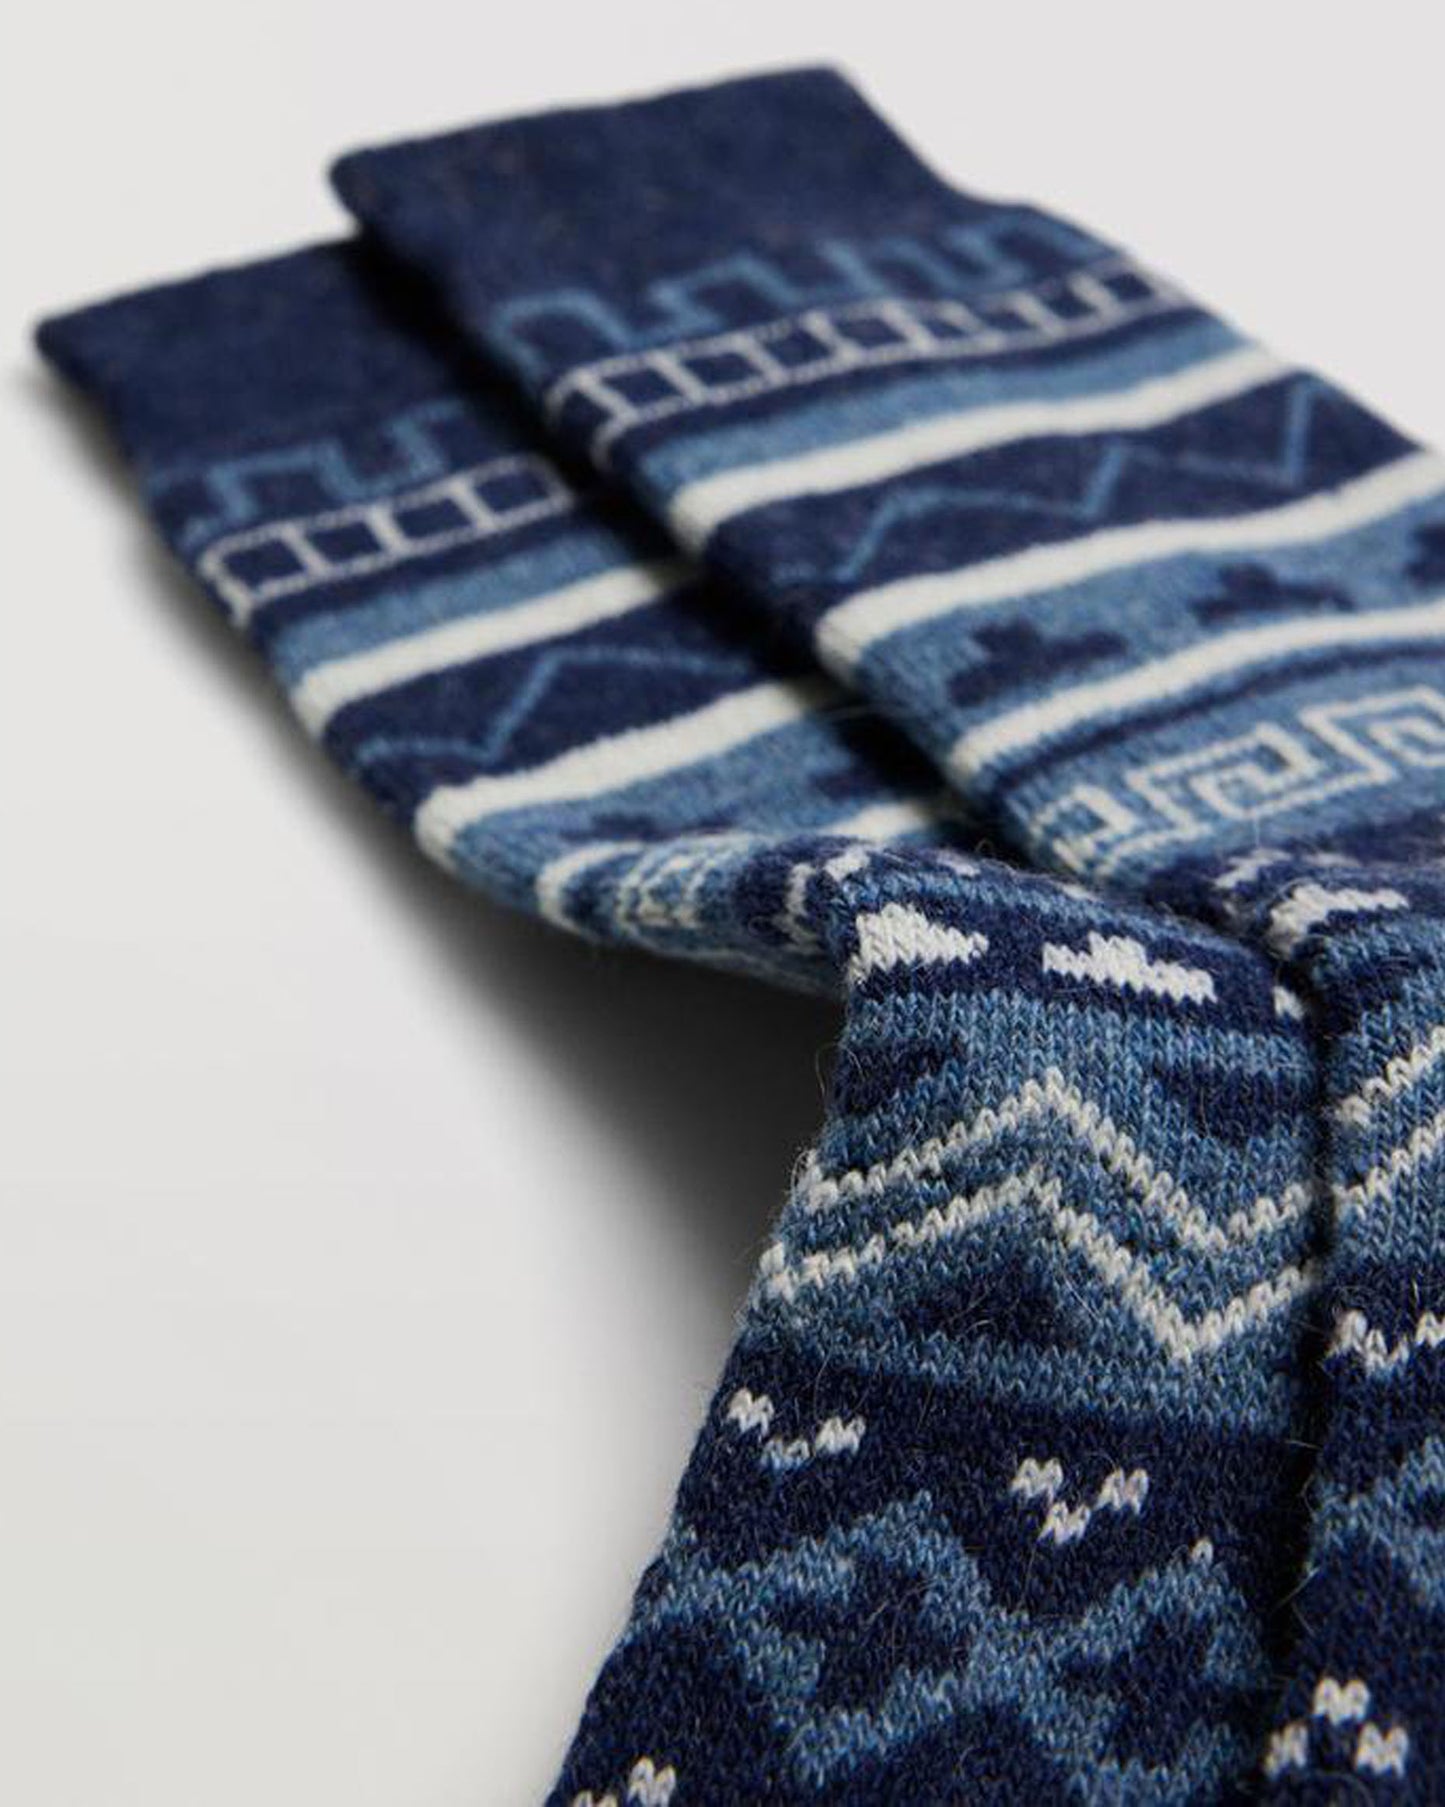 Ysabel Mora 12888 Aztec Socks - Close up detail of a dark navy blue warm wool and angora mix thermal socks with an Aztec style pattern in shades of light and pale blue.